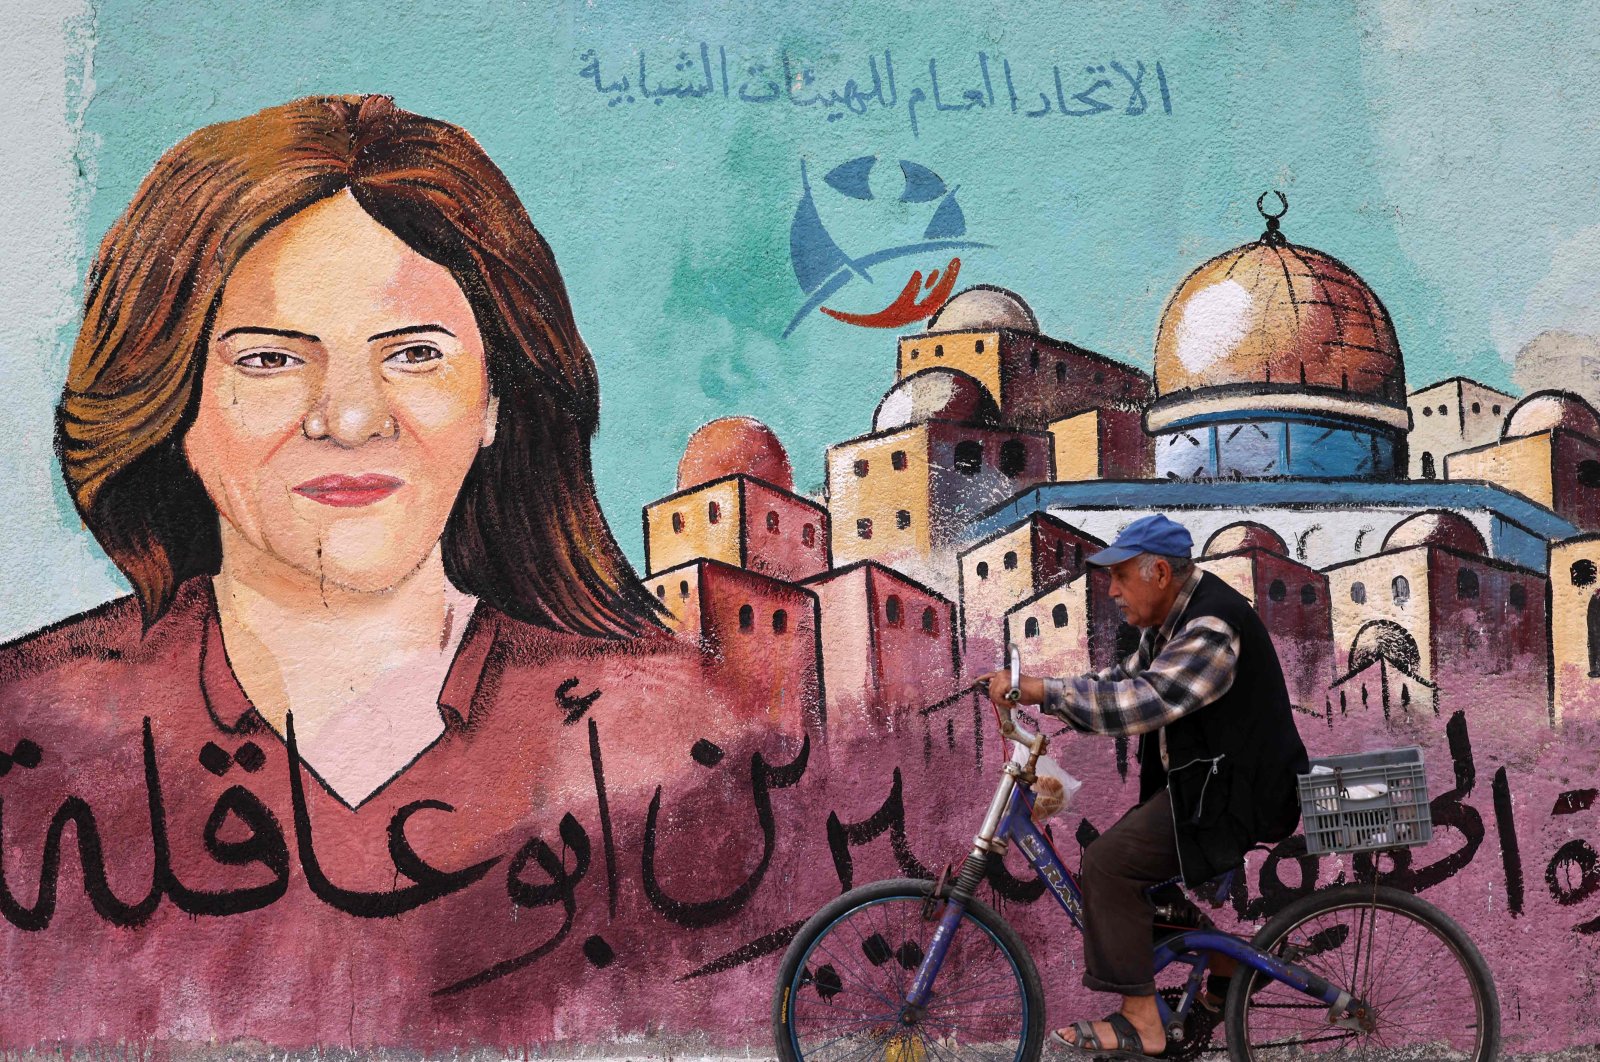 A Palestinian man rides his bicycle in front of a mural painted by an artist in honour of slain veteran Al-Jazeera journalist Shireen Abu Akleh, Gaza City, May 13, 2022. (AFP Photo)